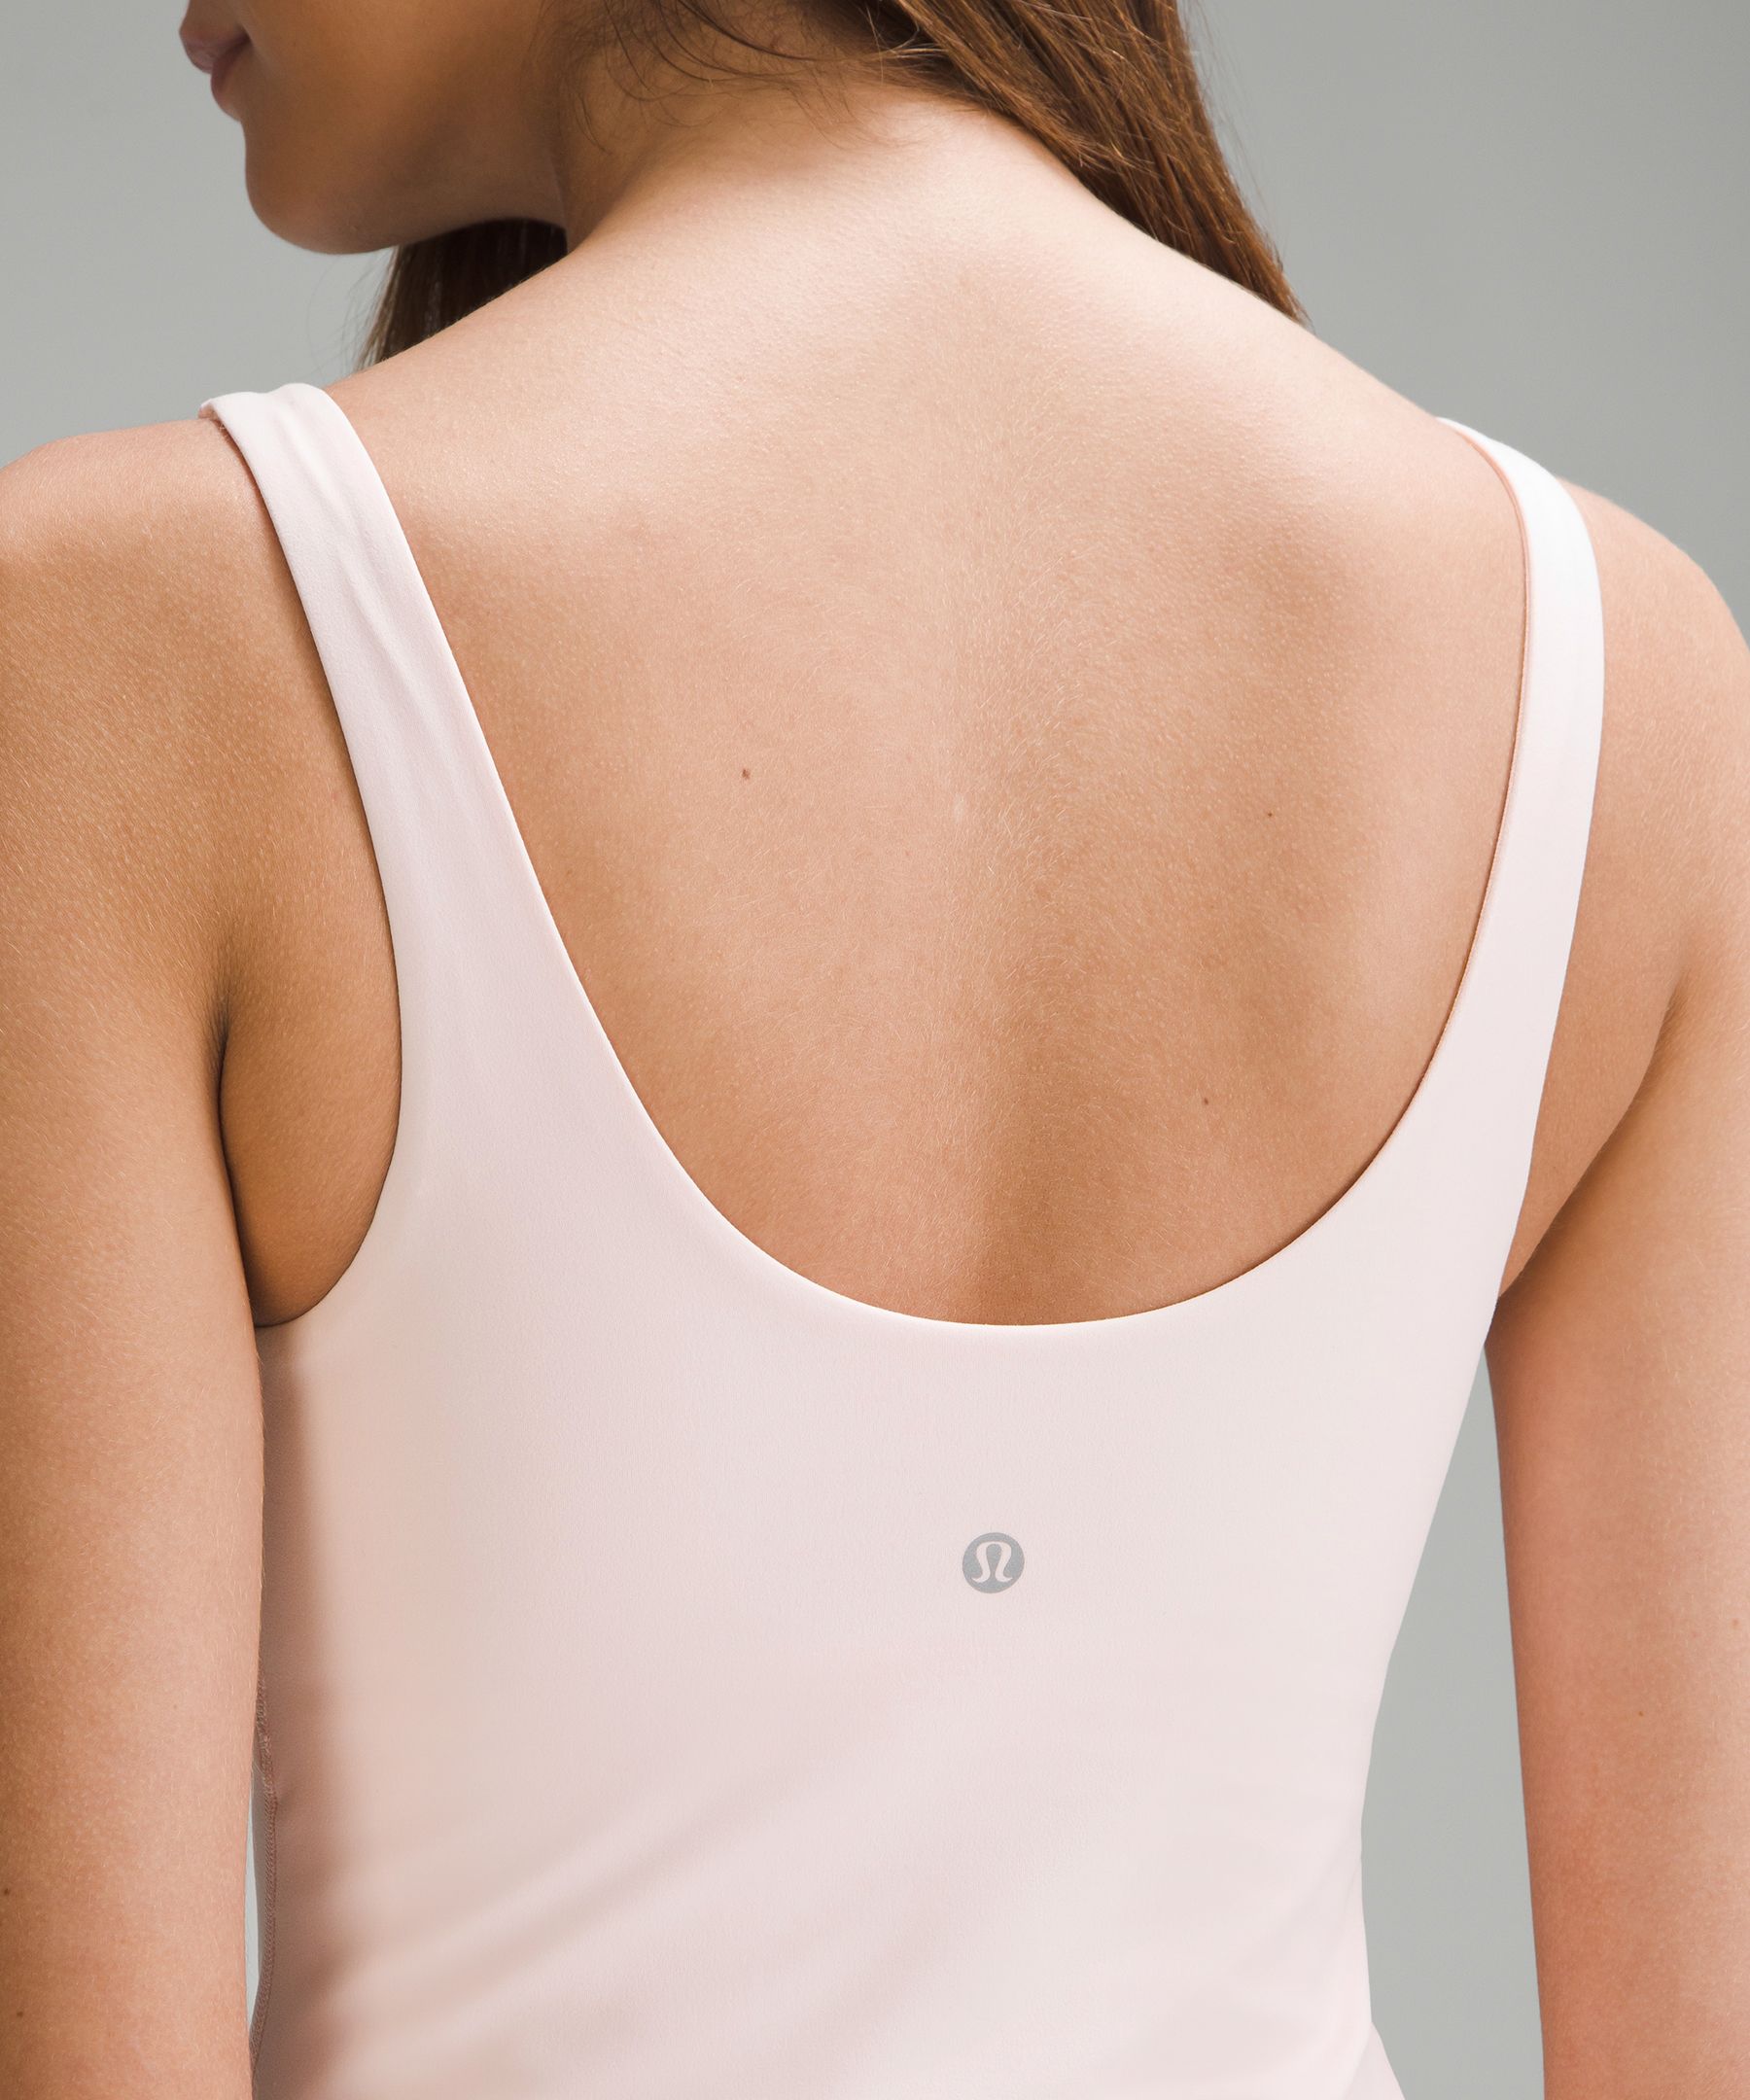 Announcement: we have the lululemon Align Bodysuit 8 and the Court Crush  Dress. Thank you for your time. #lululemon #alignbodysuit #cou